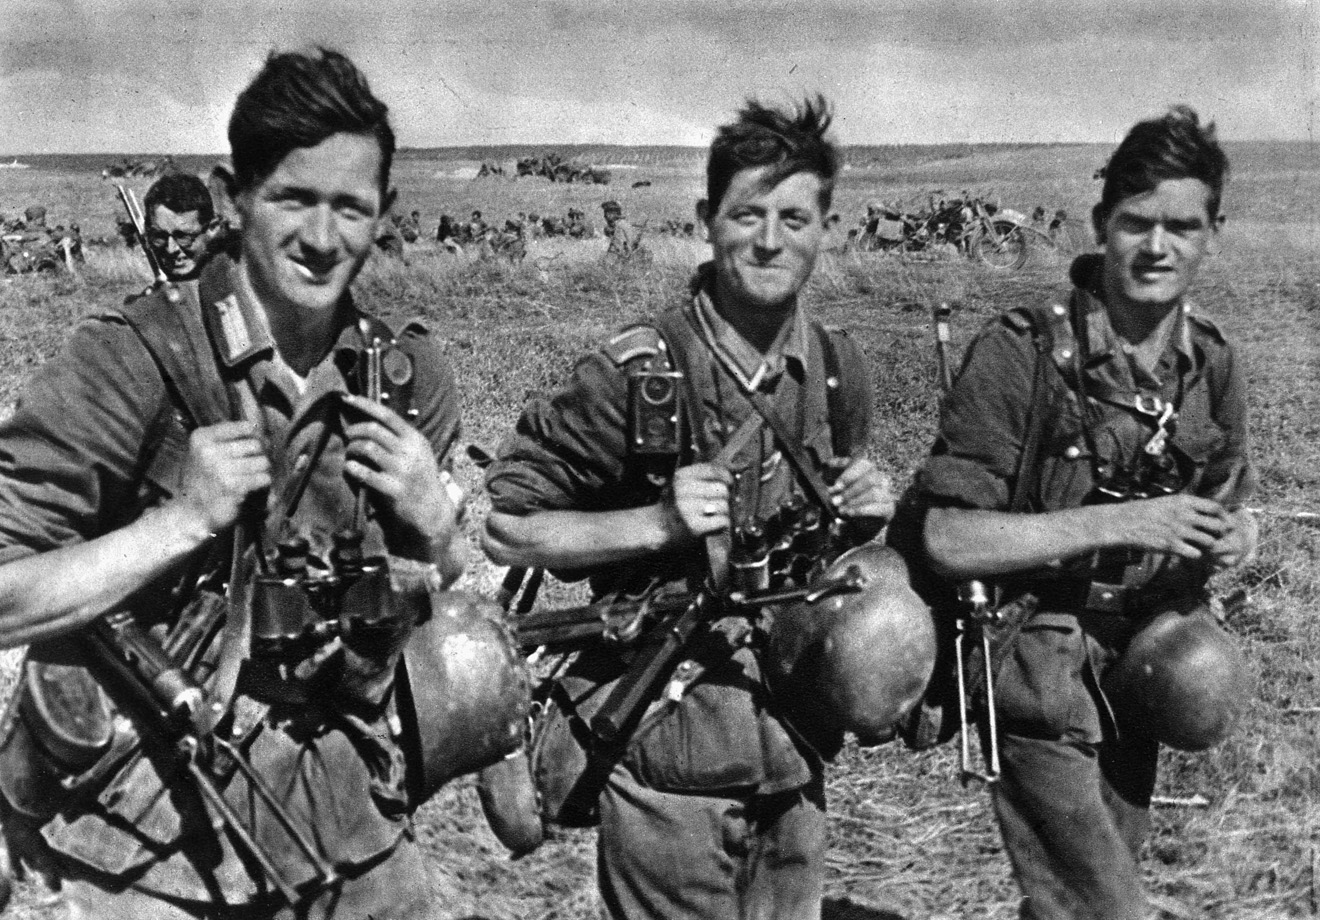 Although sun-burned and wind-blown, three Wehrmacht soldiers smile confidently, not realizing that disaster on the Eastern Front is in their future.